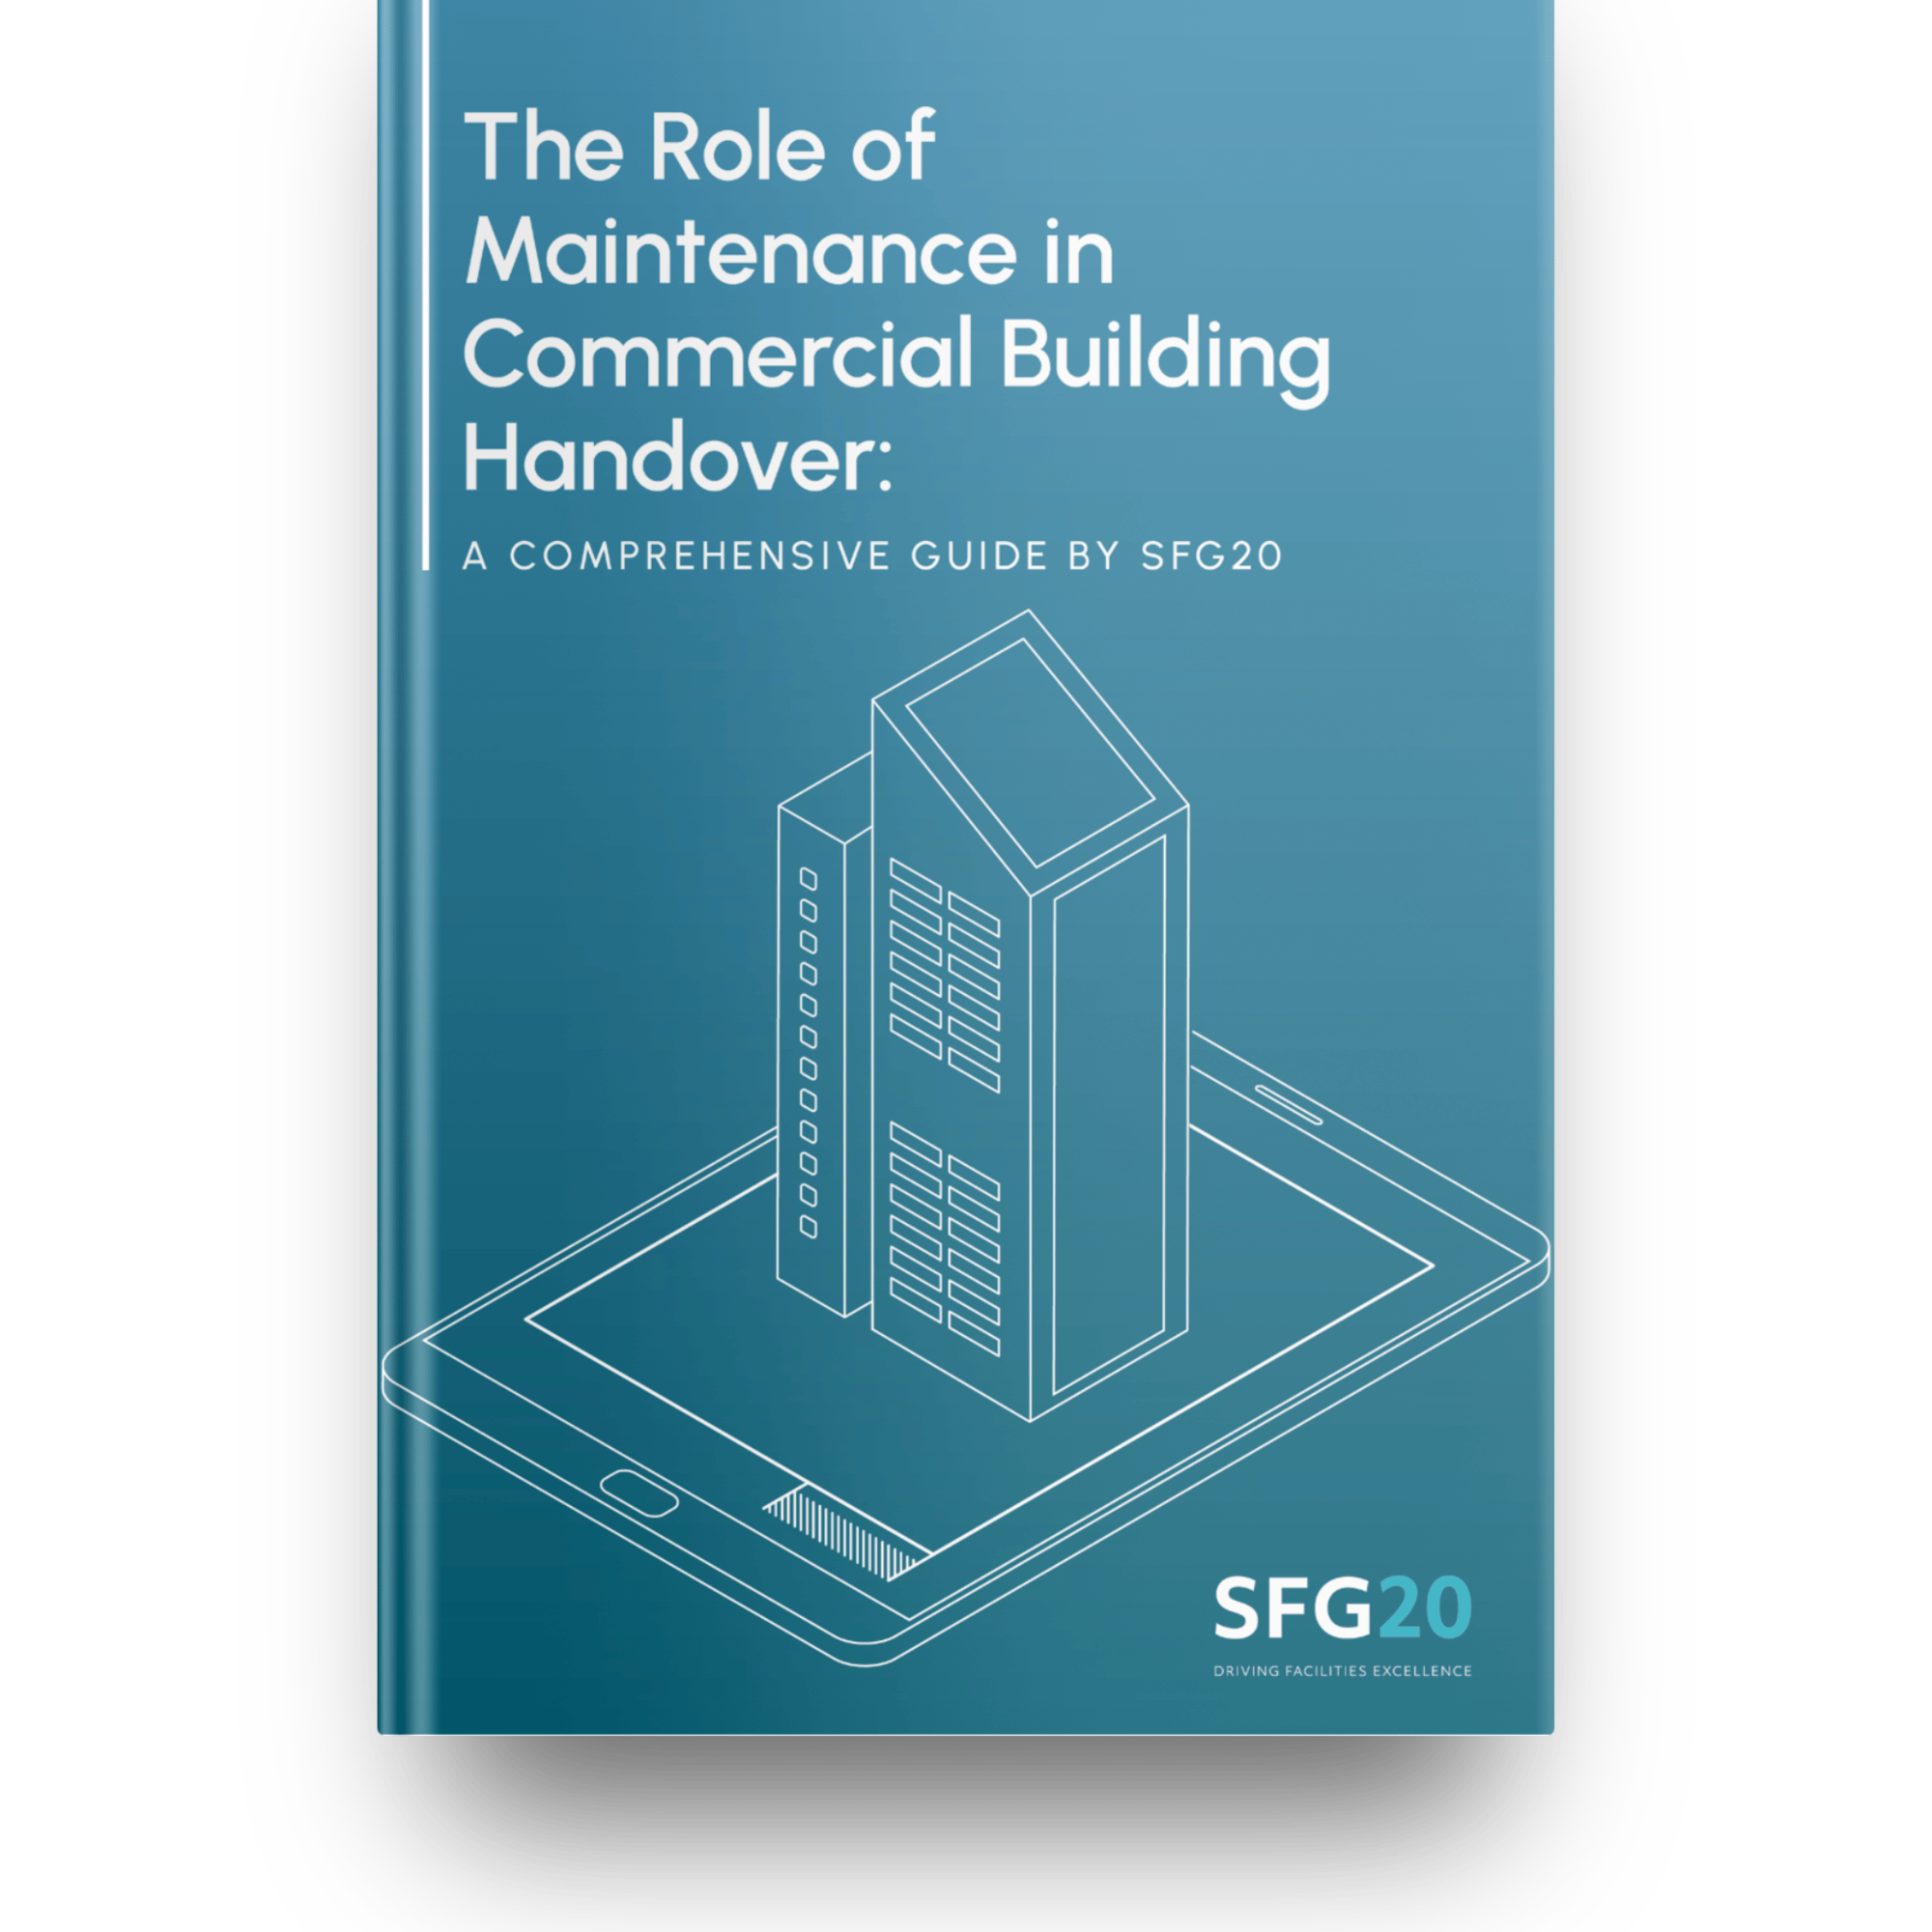 The role of maintenance in commercial building handover